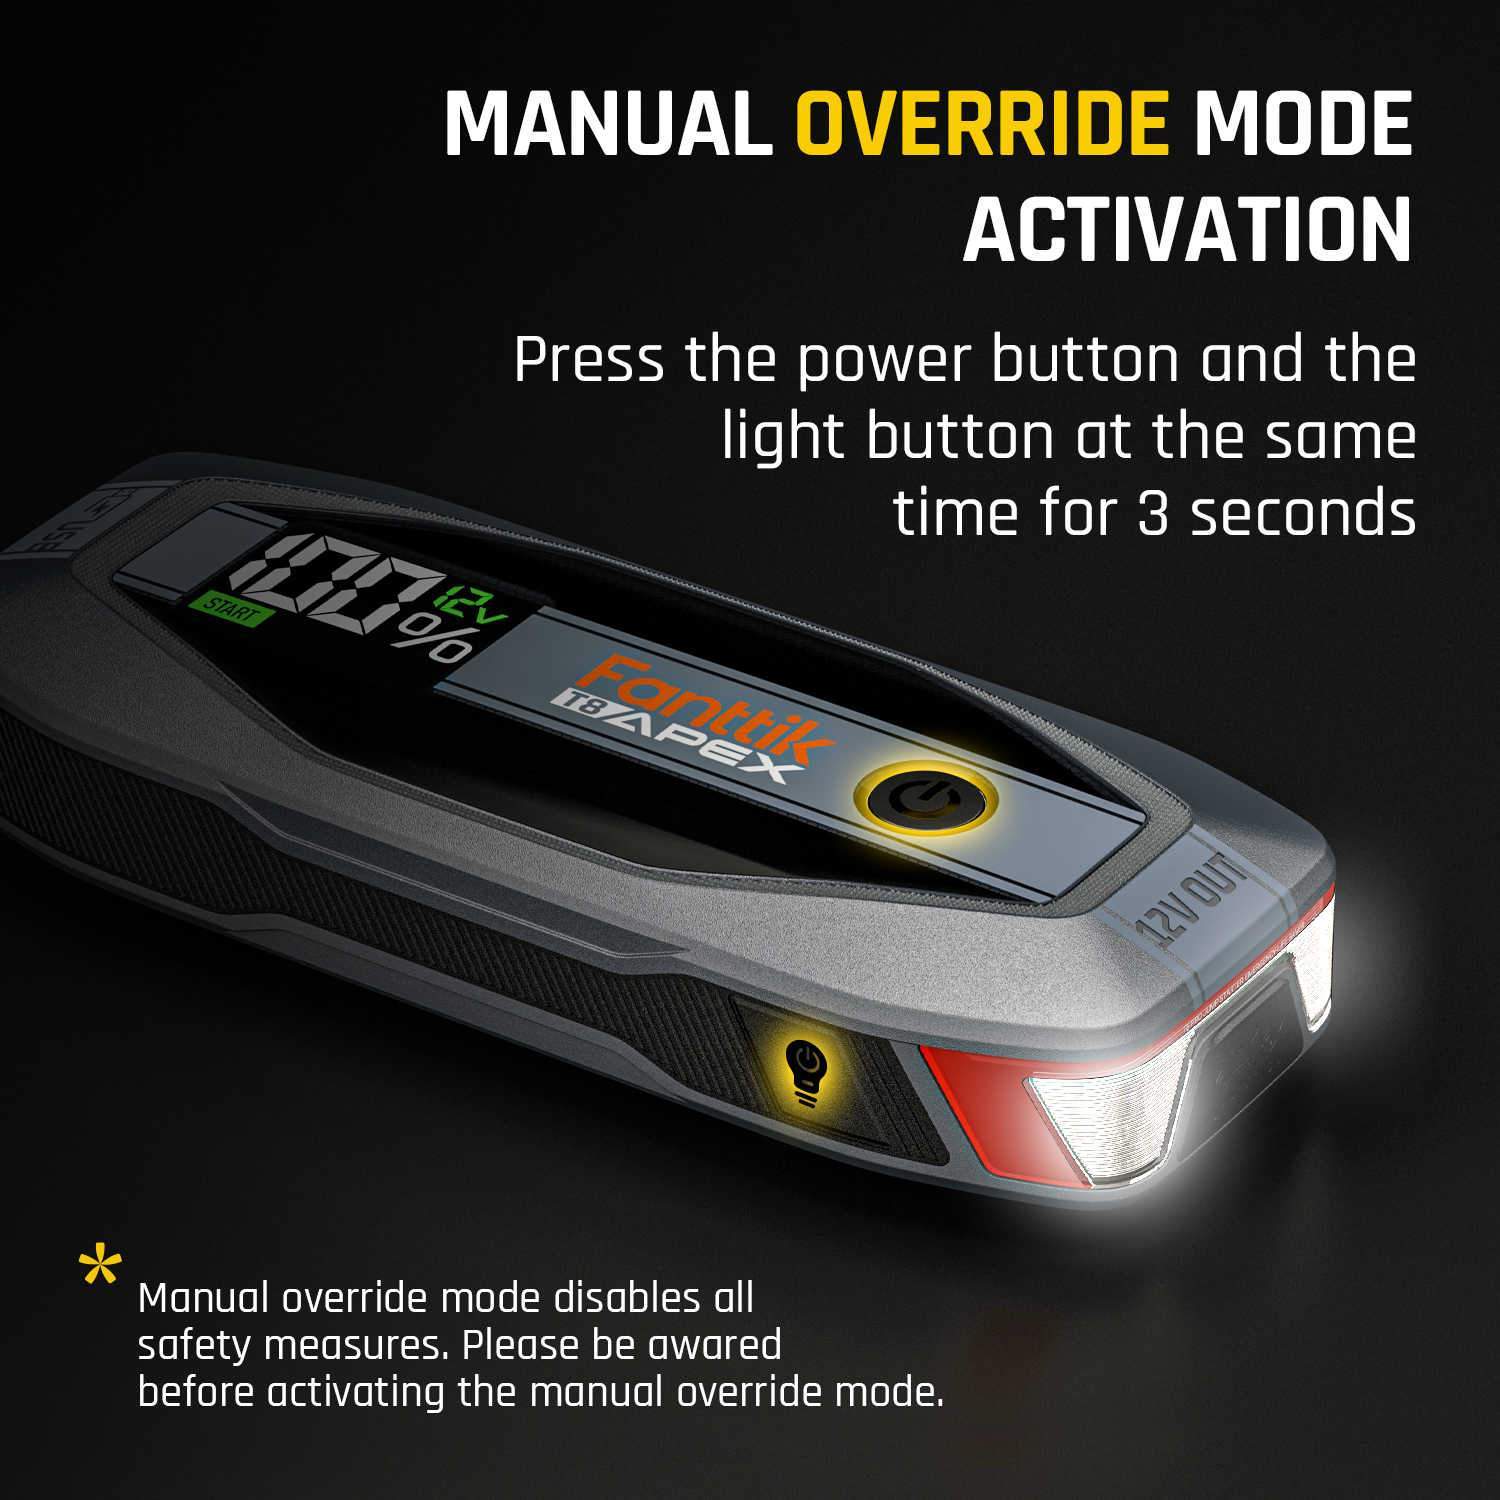 The T8 APEX jump starter offers a manual overriade mode by  press the power button and the light button at same time for 3 seconds